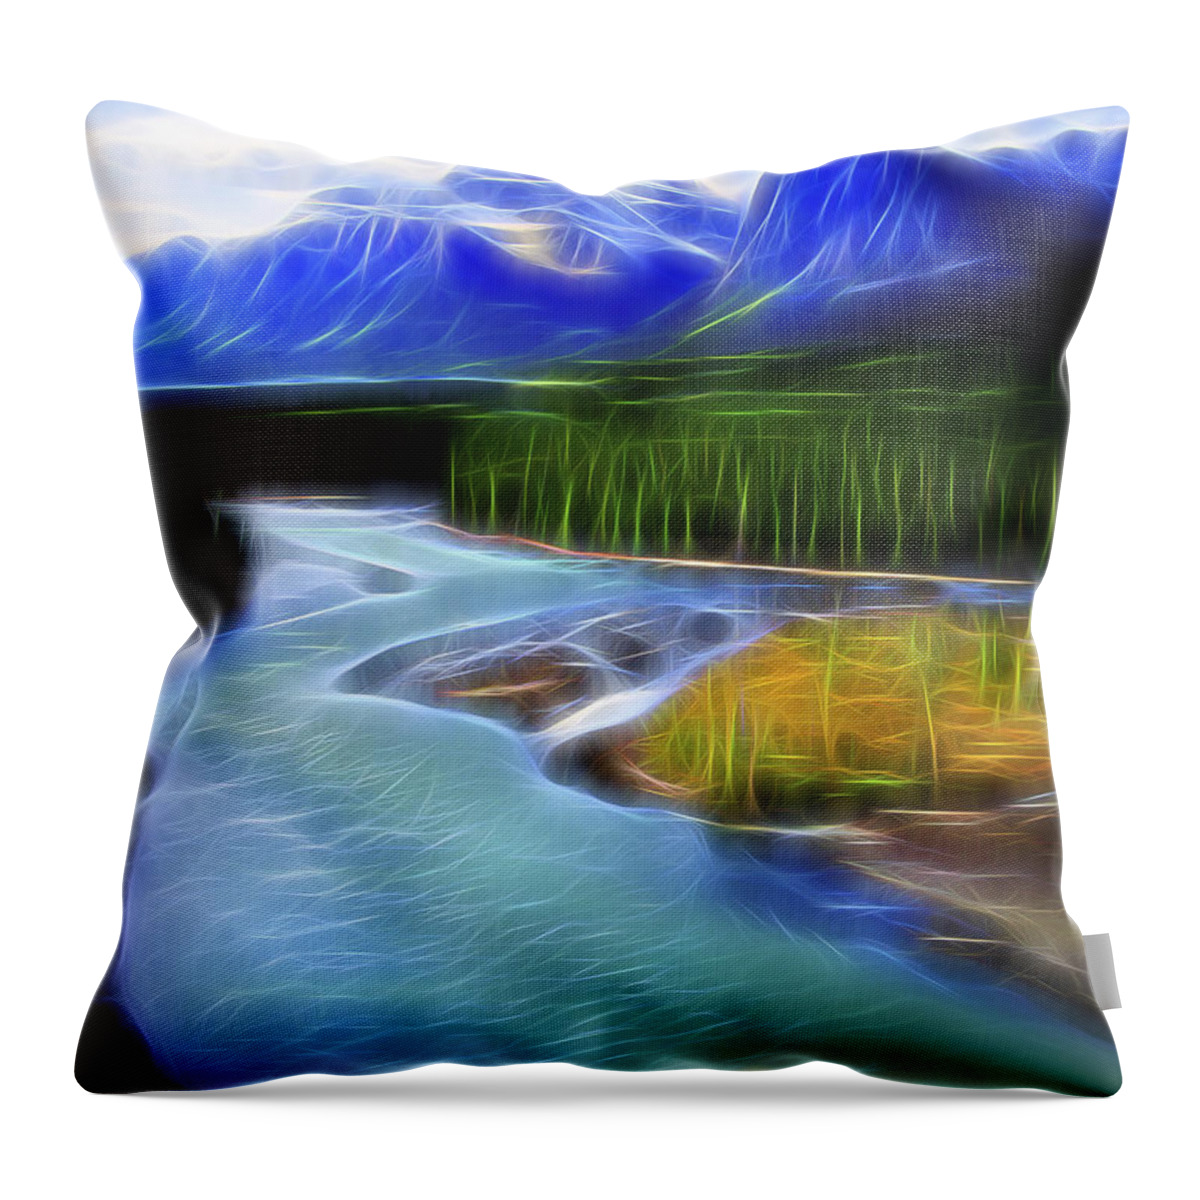 Turquoise Blues Throw Pillow featuring the digital art Turquoise Light 1 by William Horden